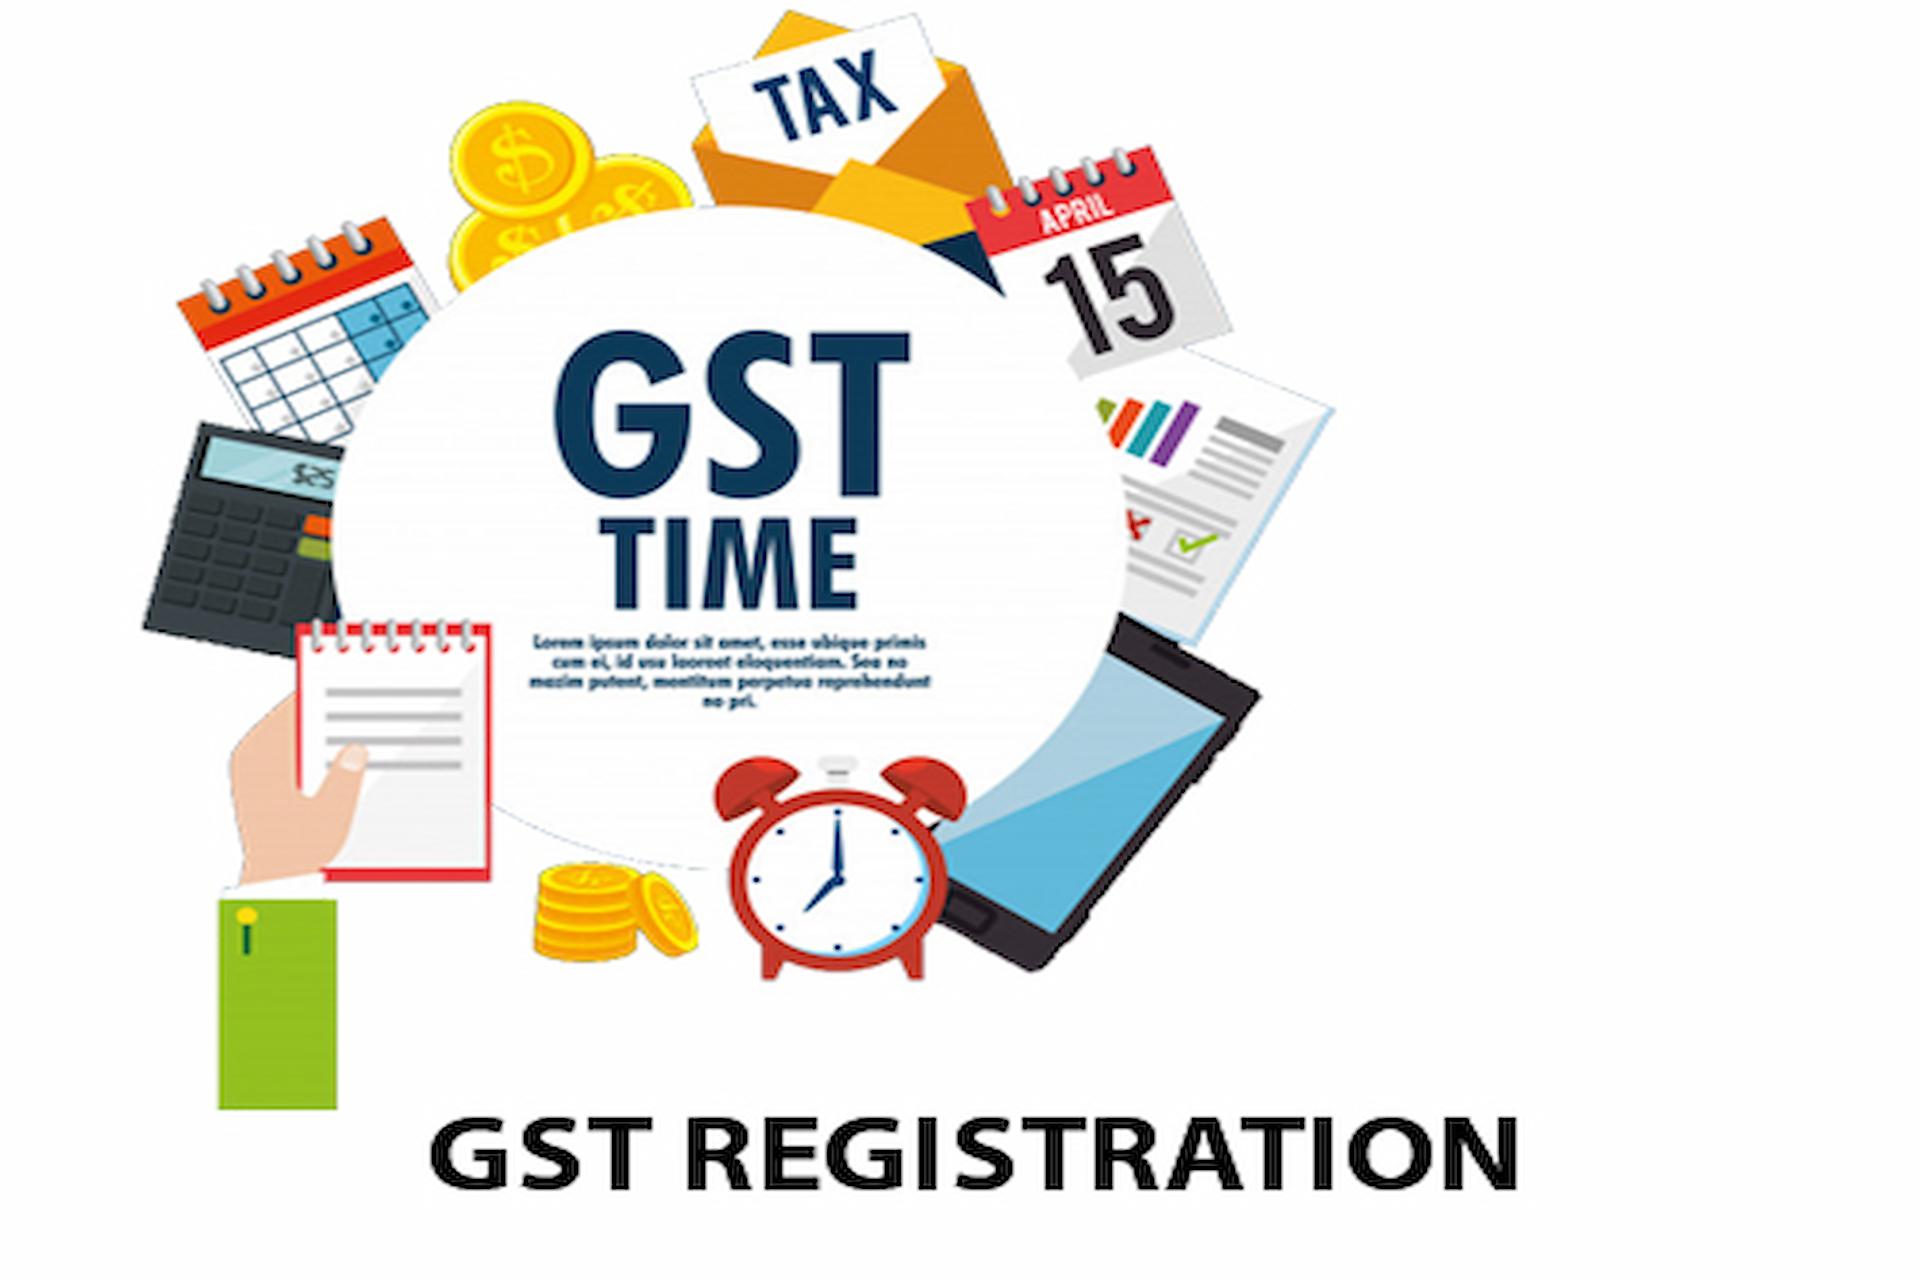 What Does Every Small Business Need To Know About GST Registration?